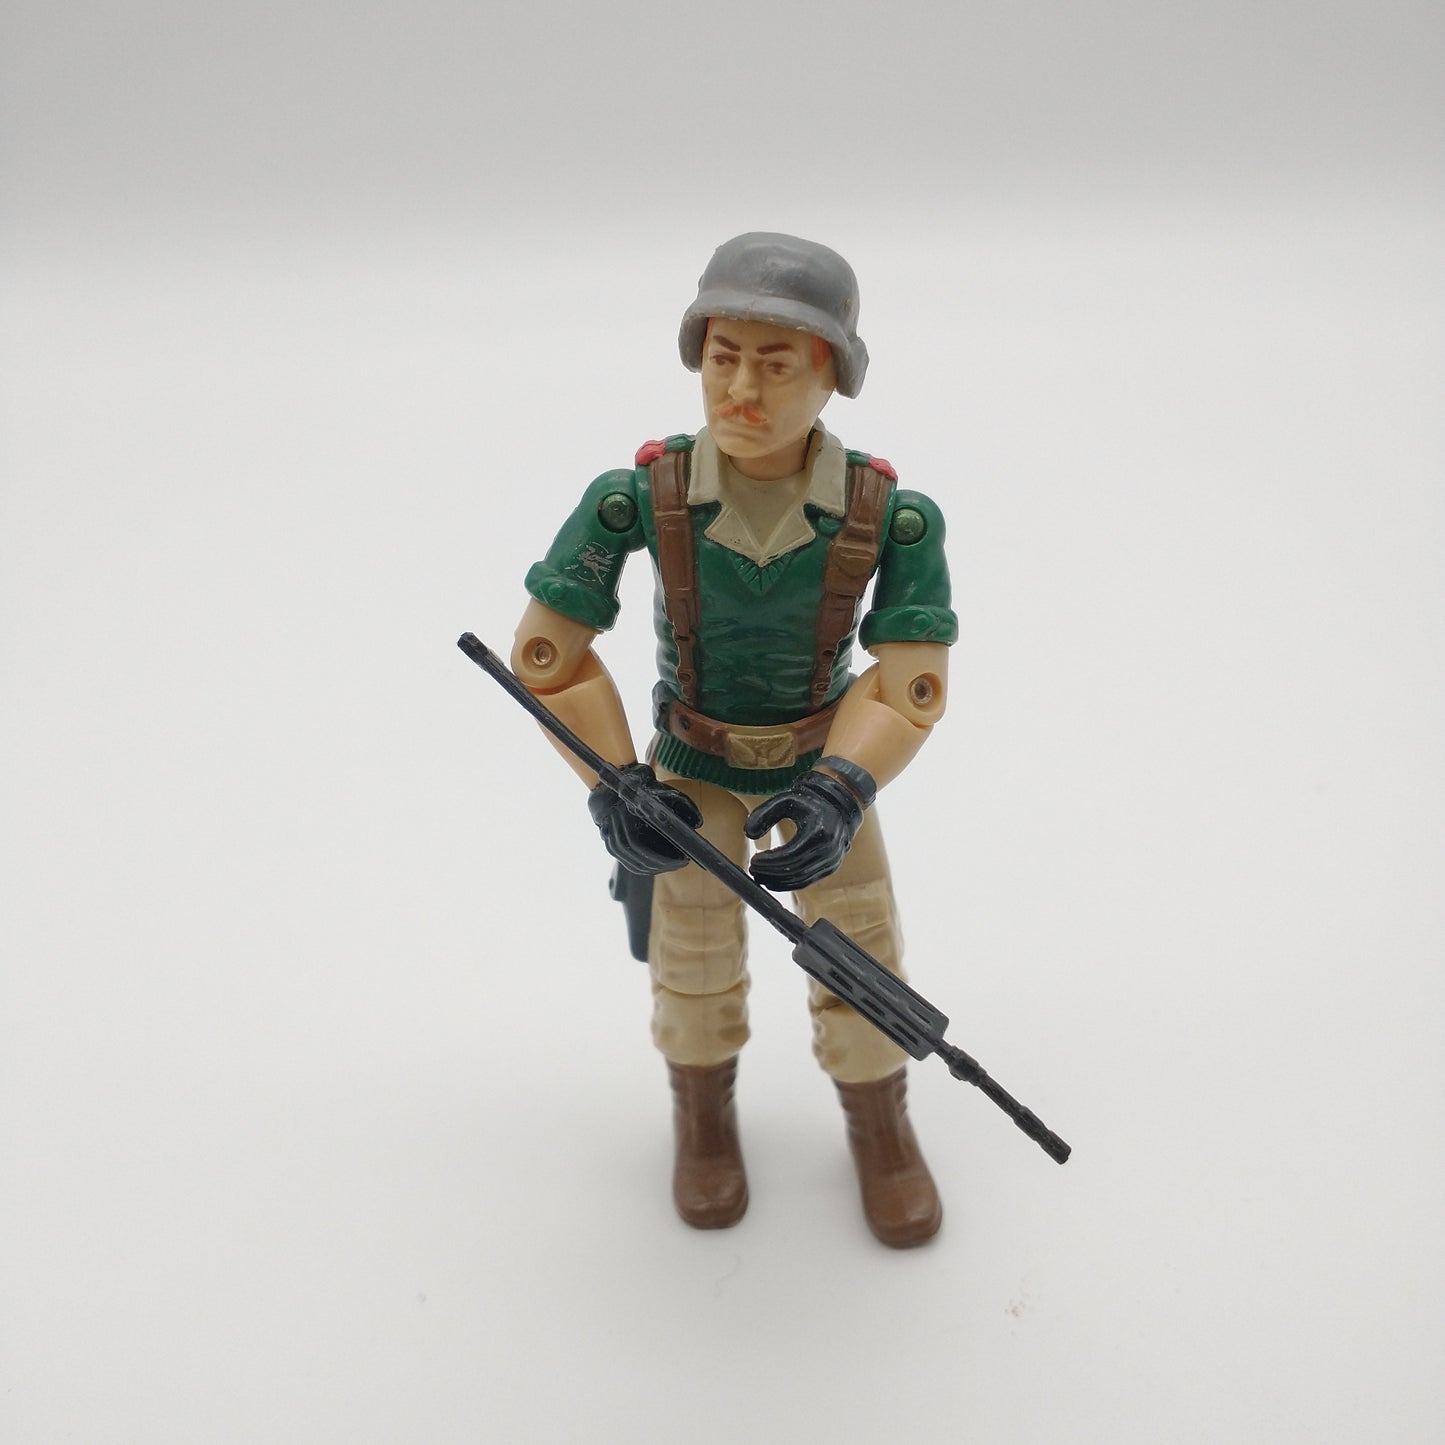 The figure is holding a long thin gun, wearing a silver hat and green shirt with suspenders and tan pants